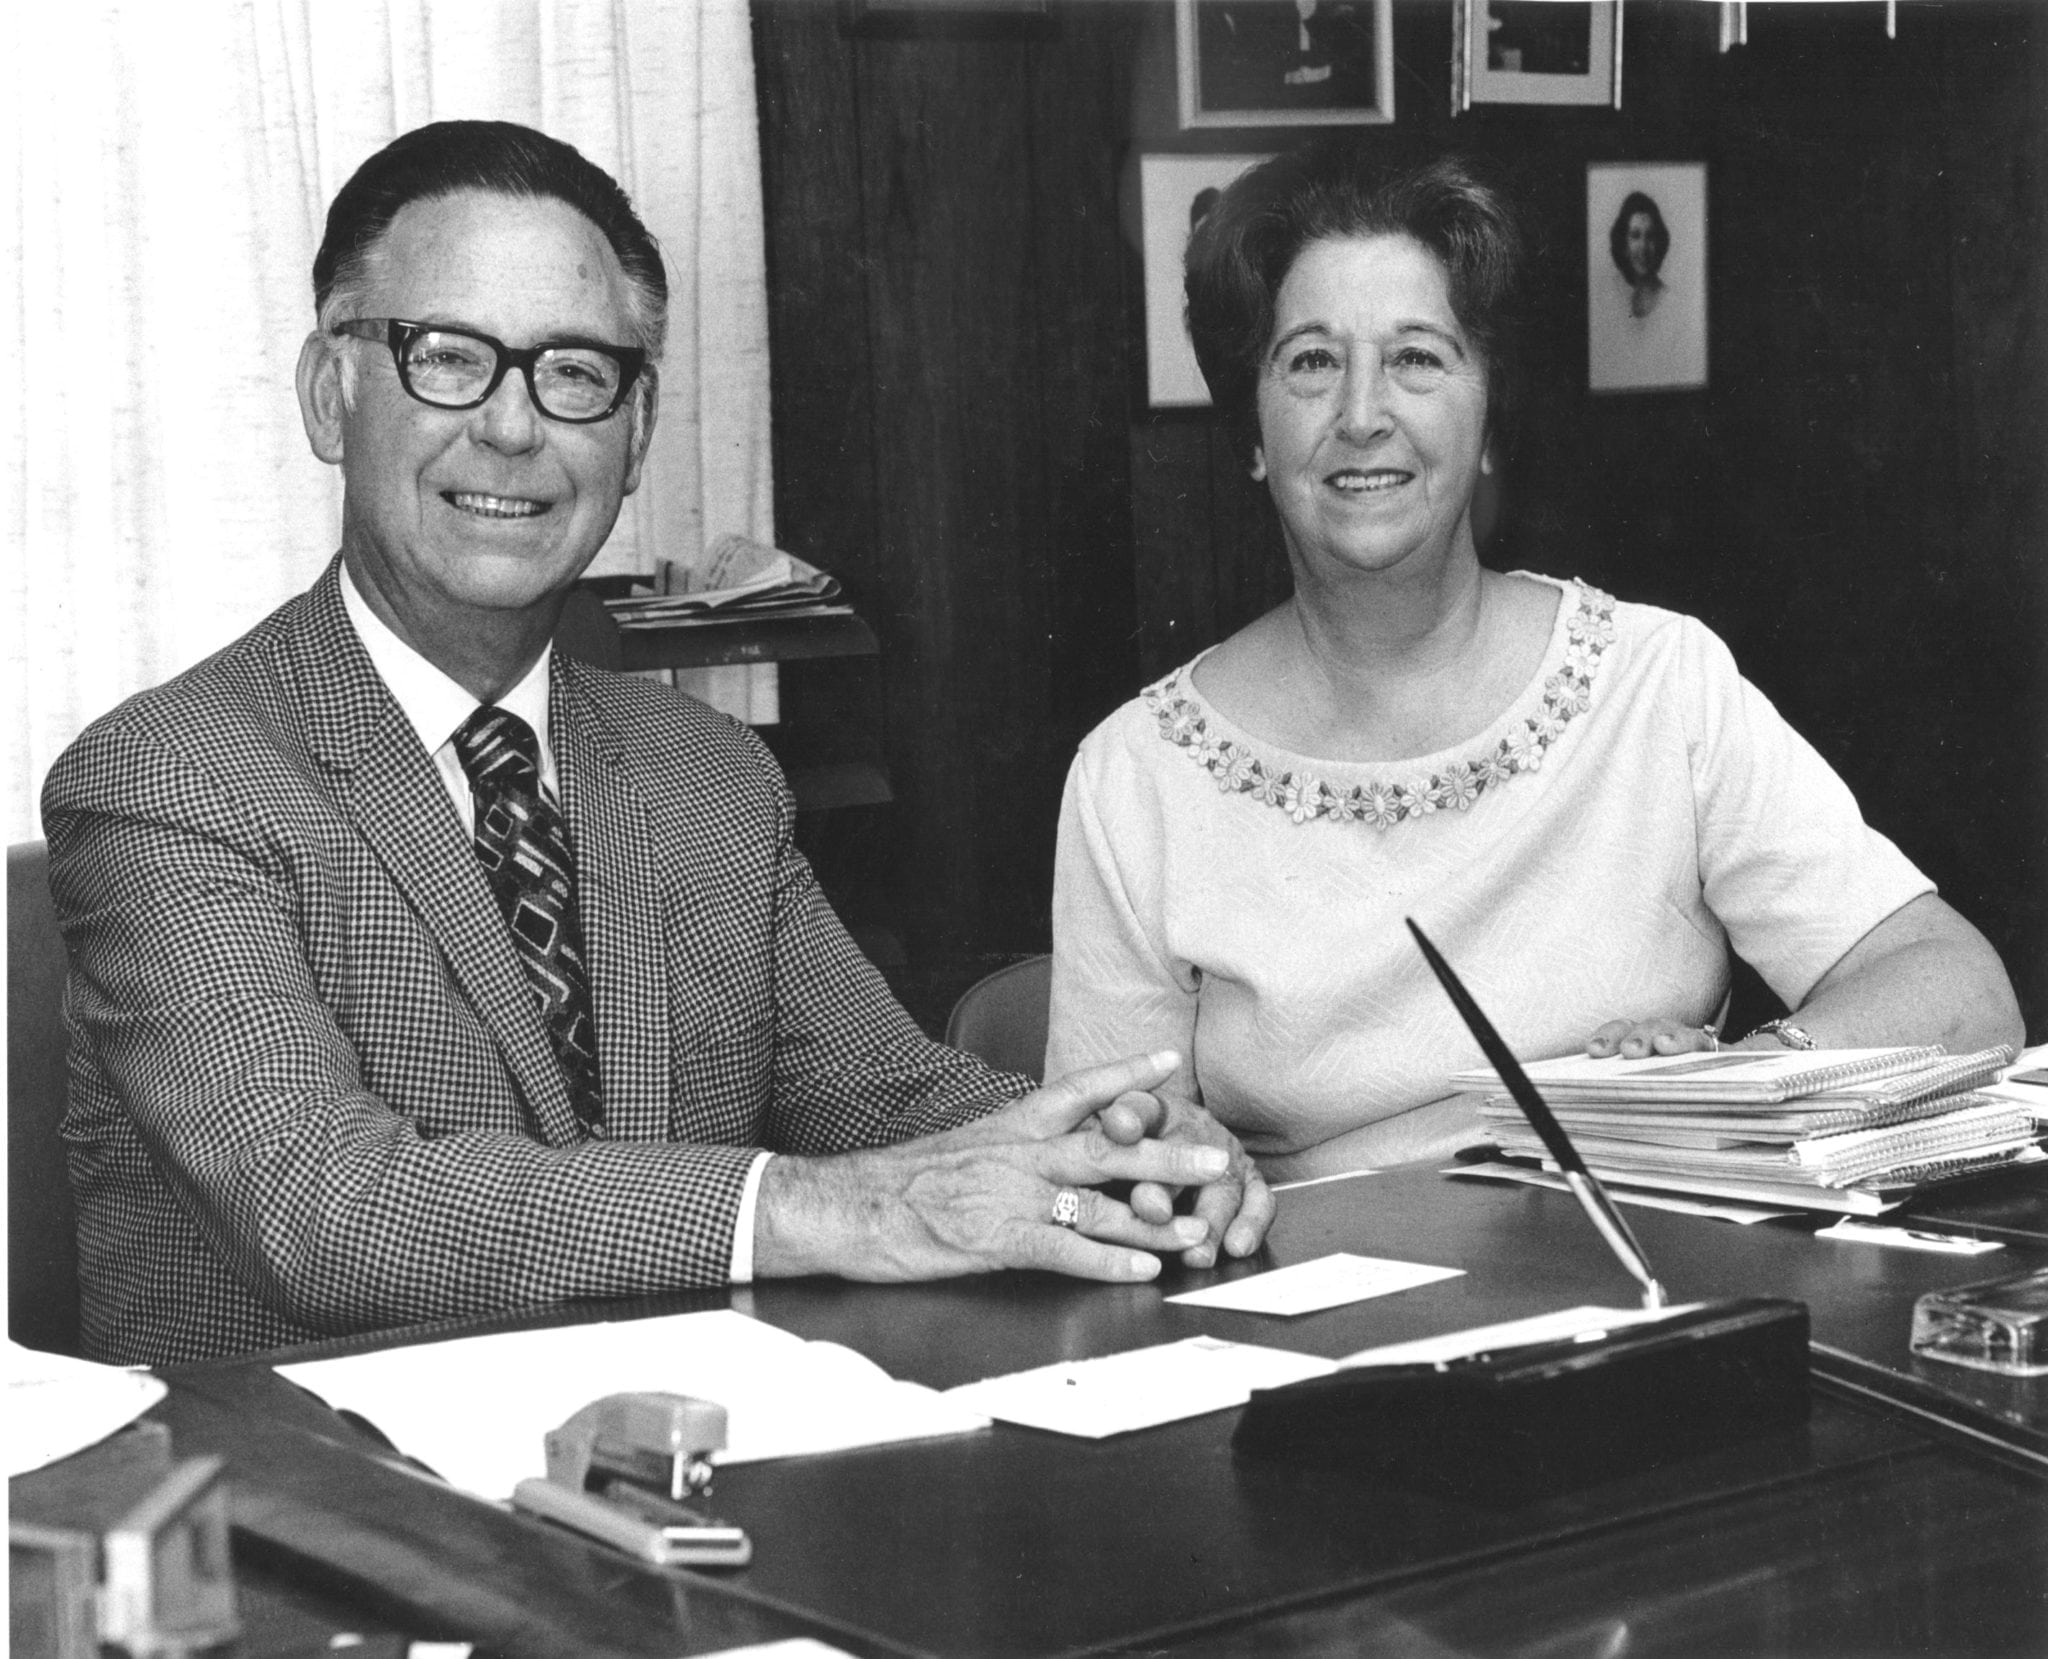 Ed and Marge Bridges are seated together at a desk in an office.